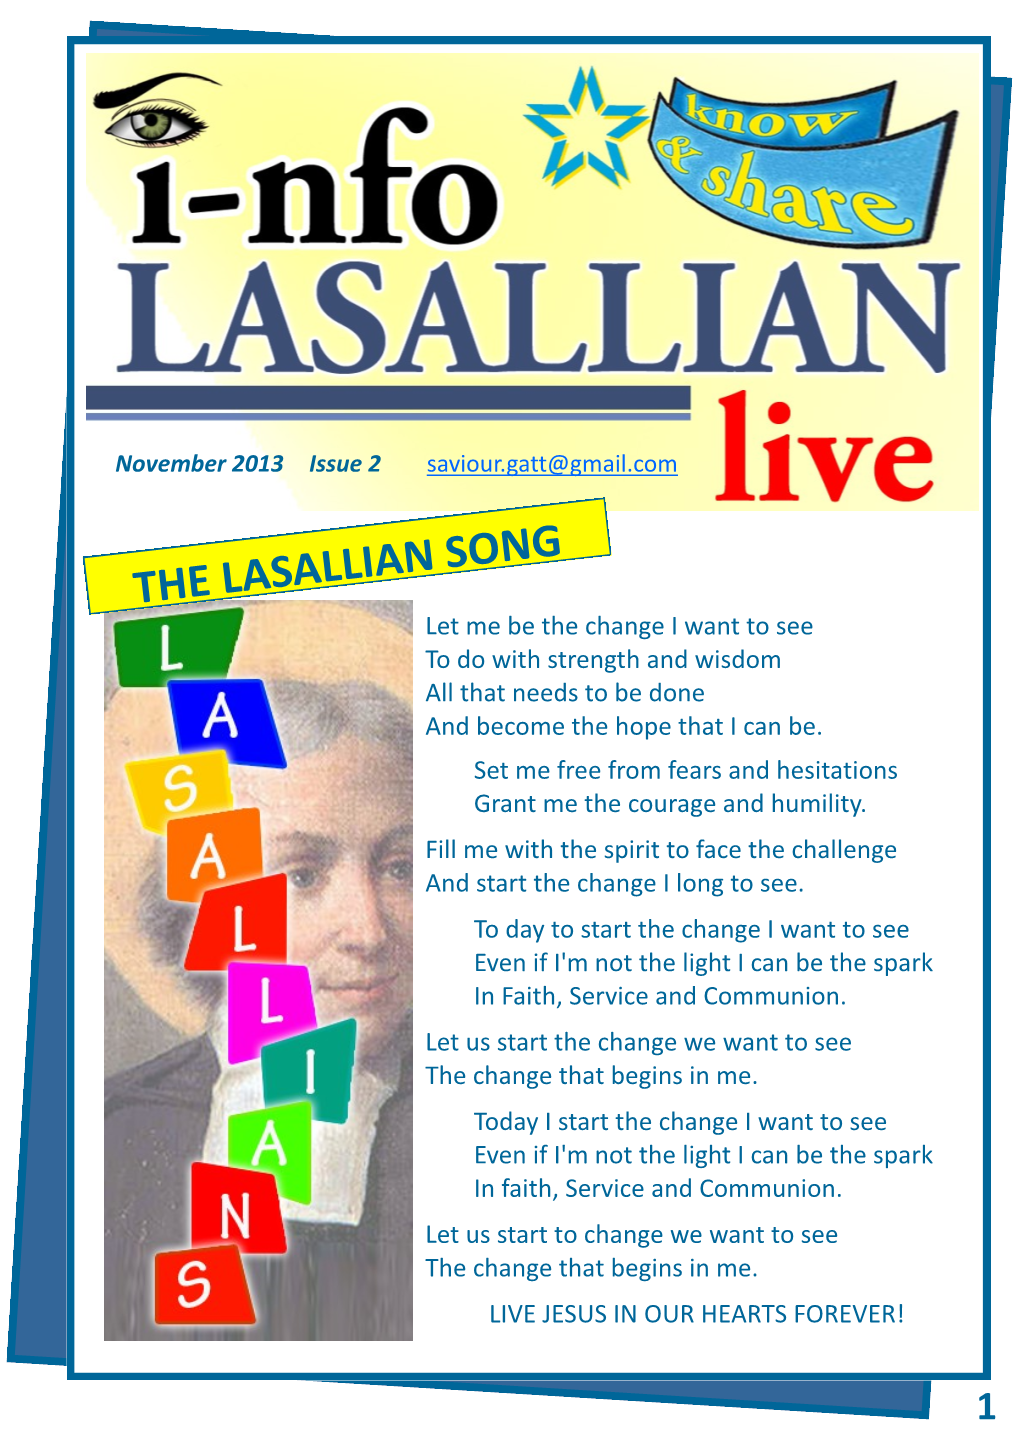 THE LASALLIAN SONG Let Me Be the Change I Want to See to Do with Strength and Wisdom All That Needs to Be Done